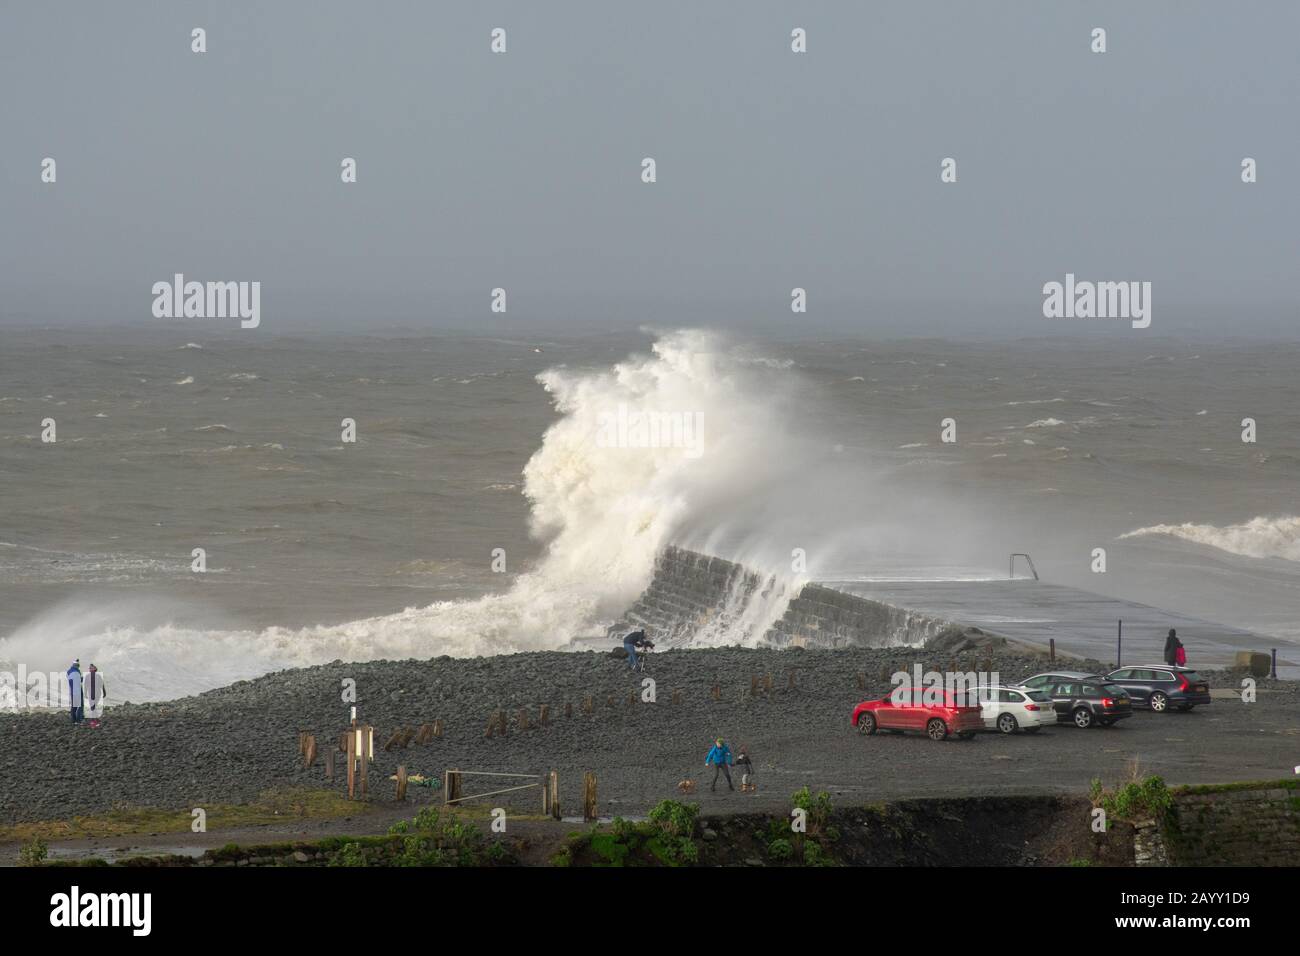 Gale force winds gusting at over 60mph and the morning’s high tide combine, bringing huge waves sweeping across the Irish Sea to batter Aberystwyth. Stock Photo